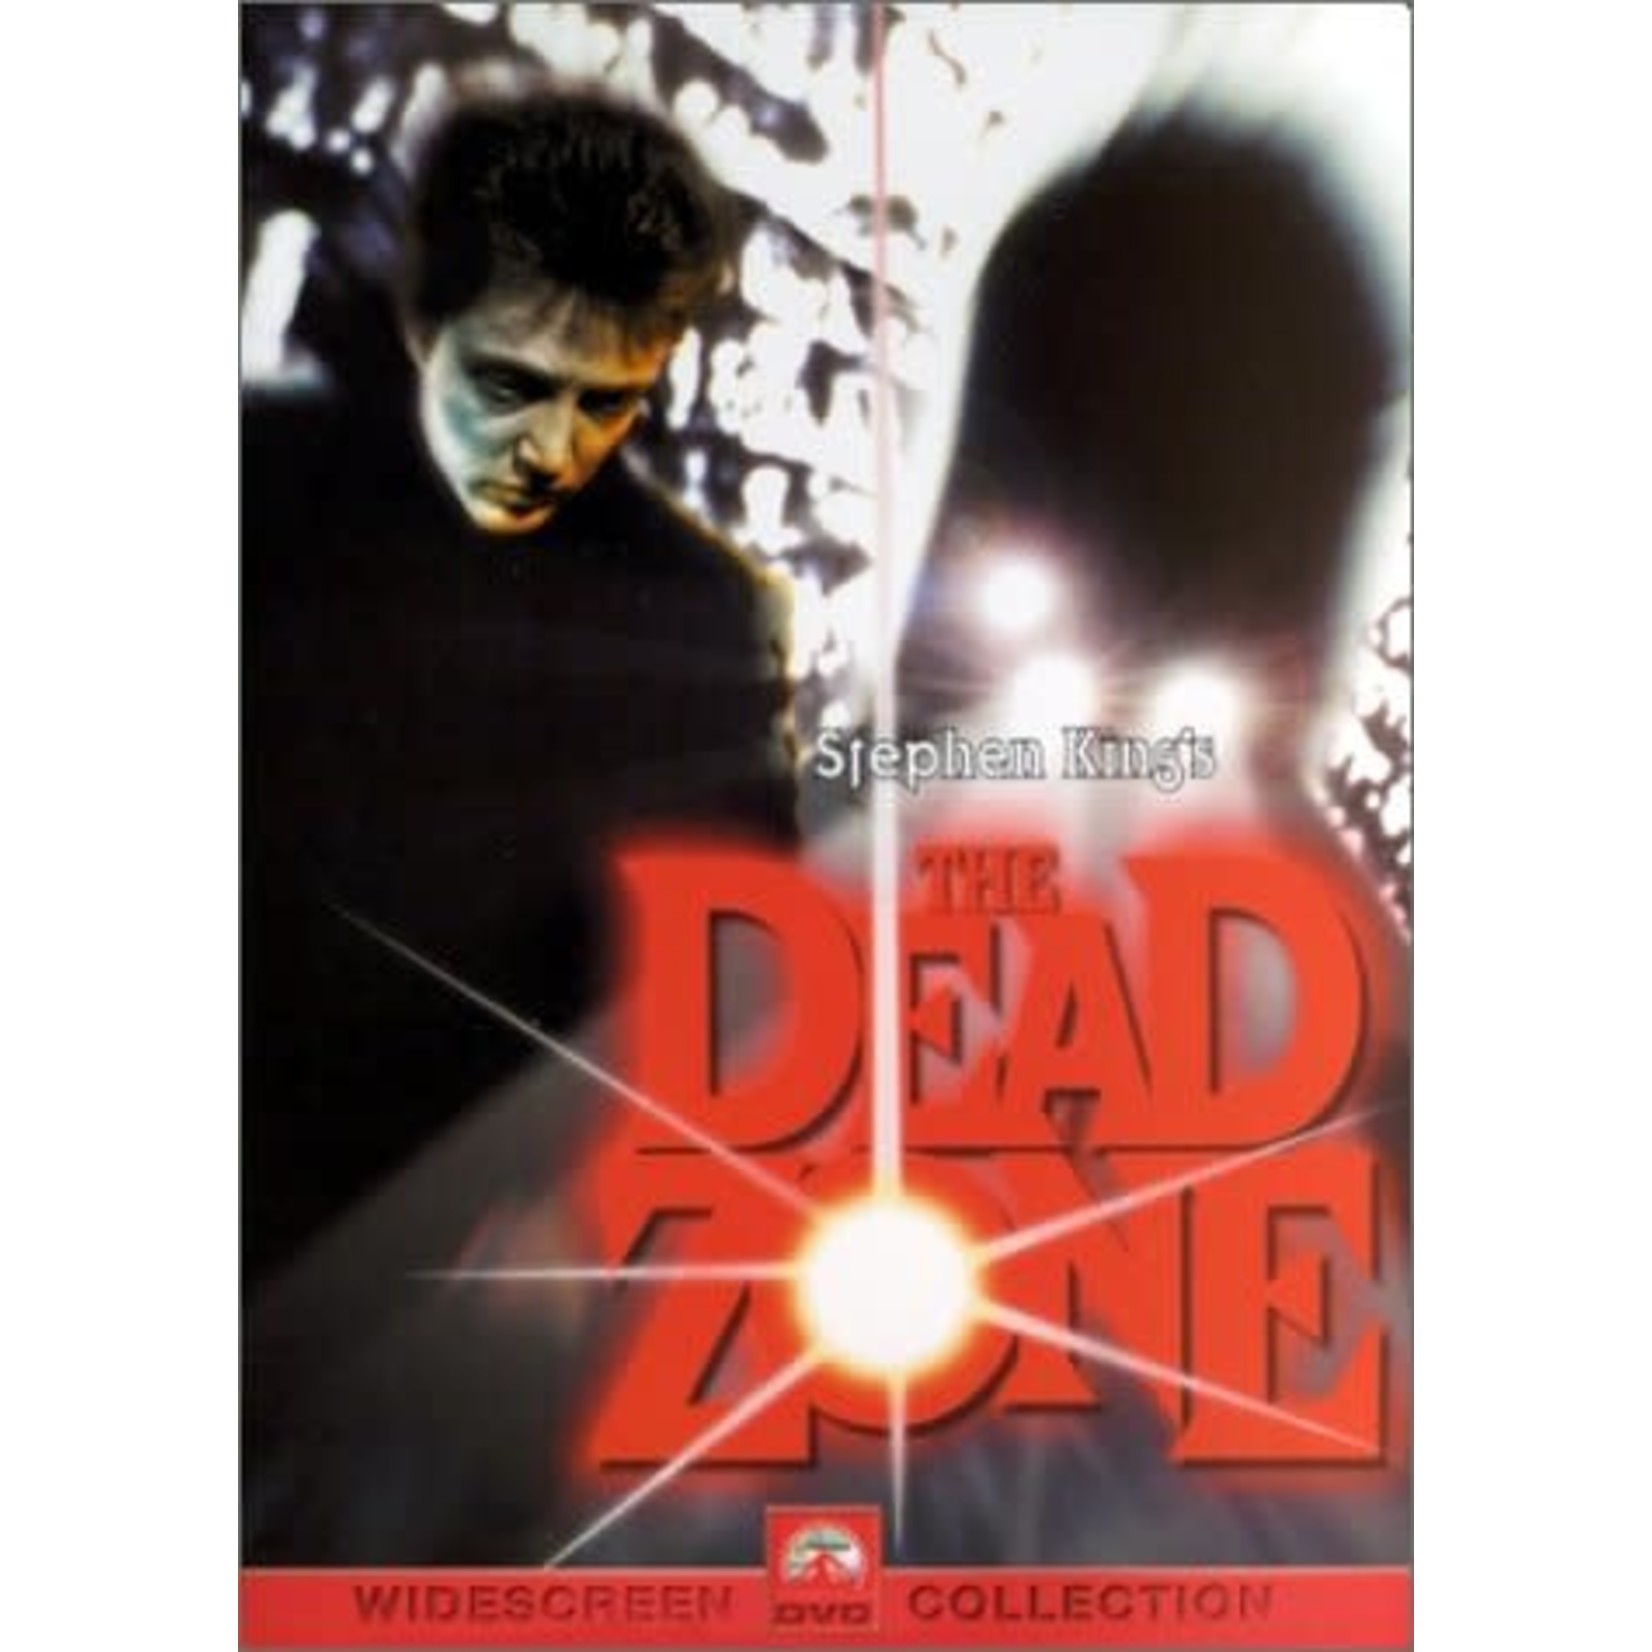 Dead Zone (1983) [USED DVD]